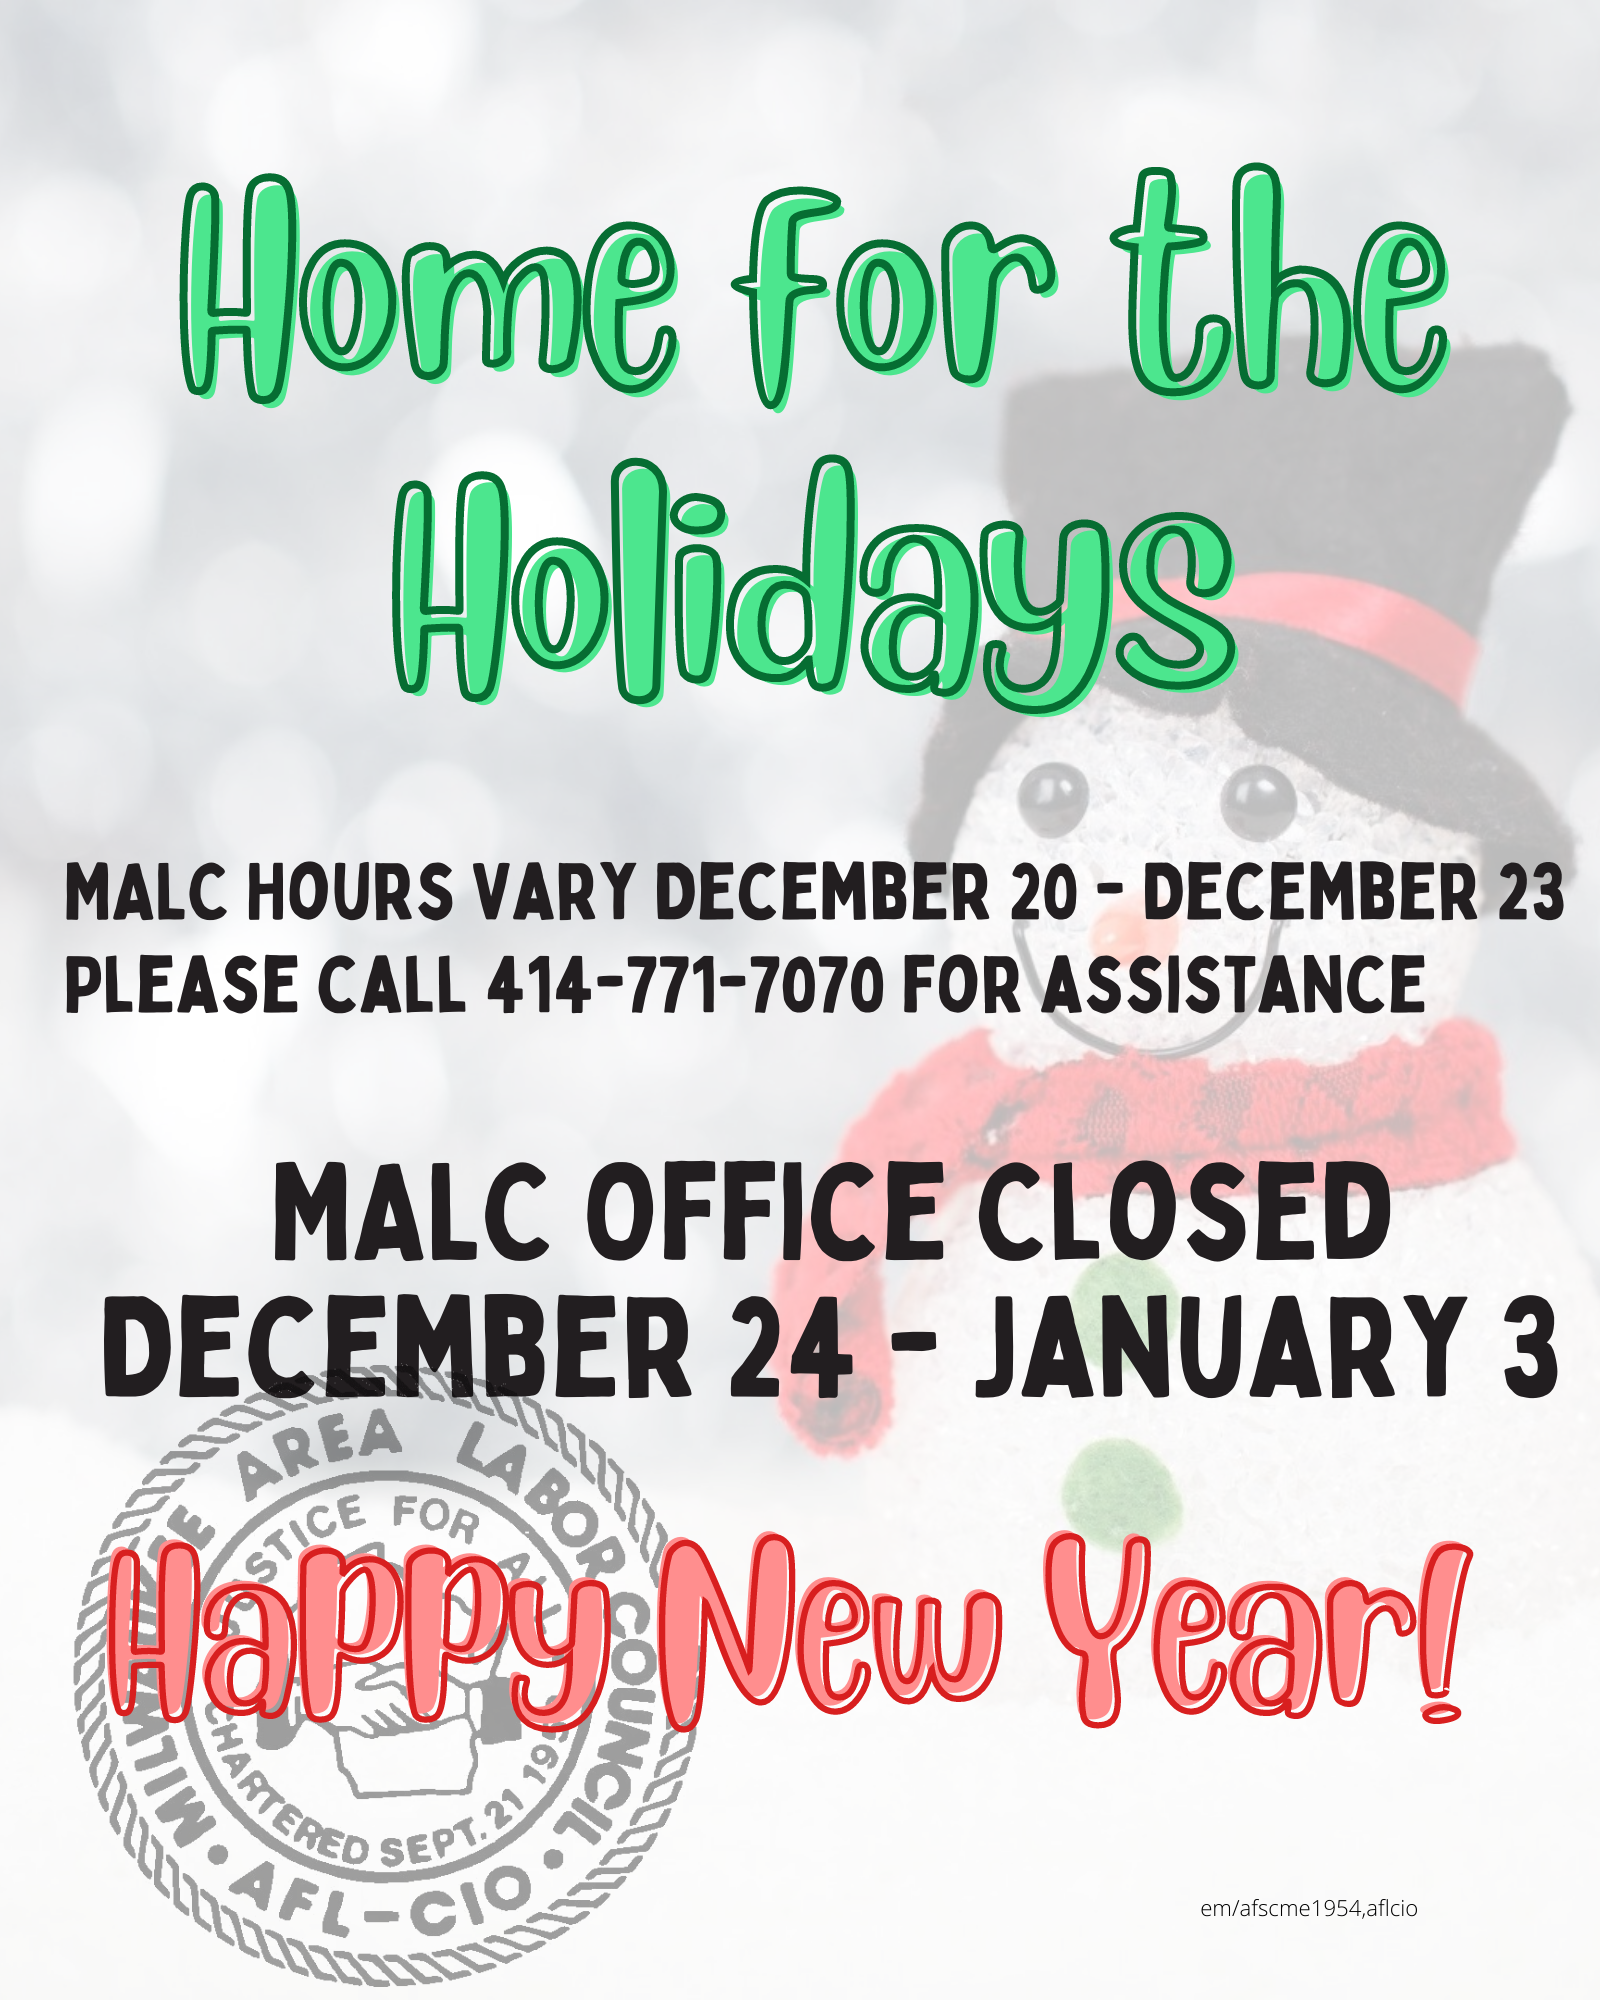 MALC Holiday Office Hours